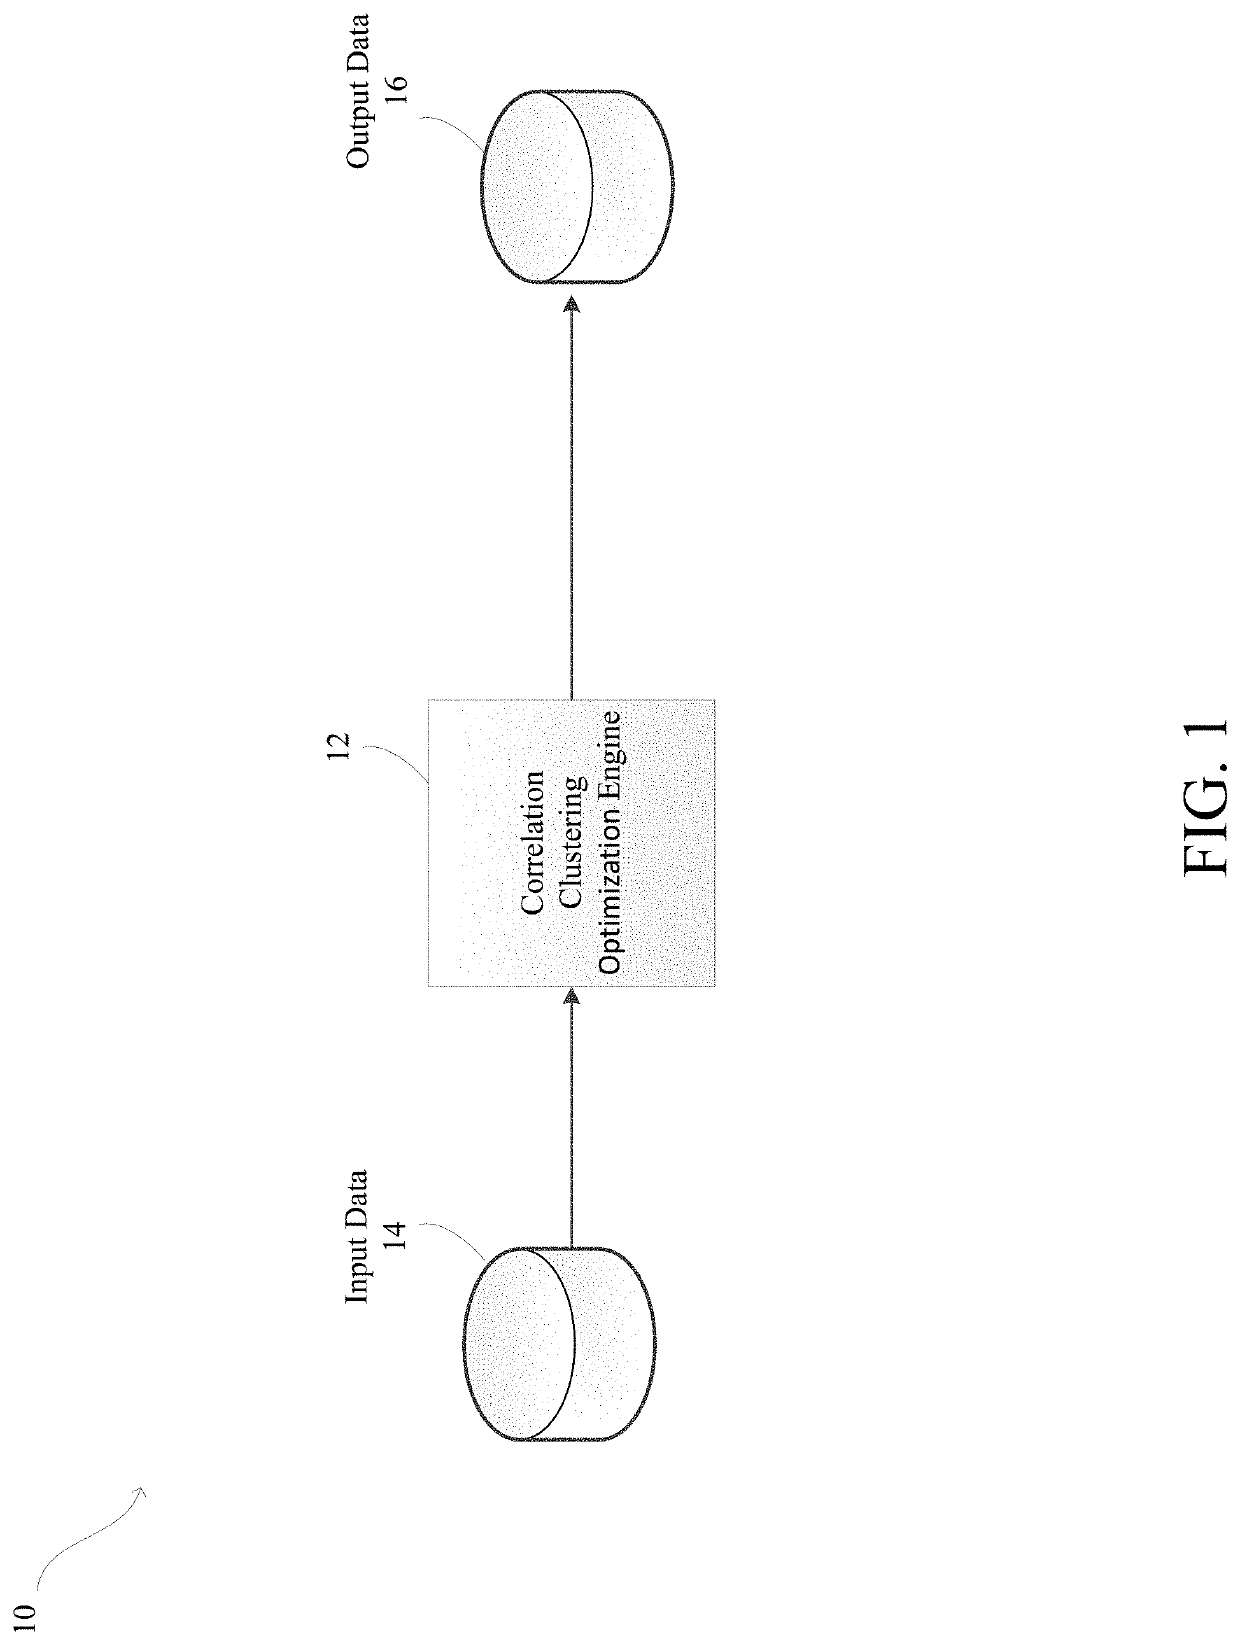 Computer Vision Systems and Methods for Optimizing Correlation Clustering for Image Segmentation Using Benders Decomposition